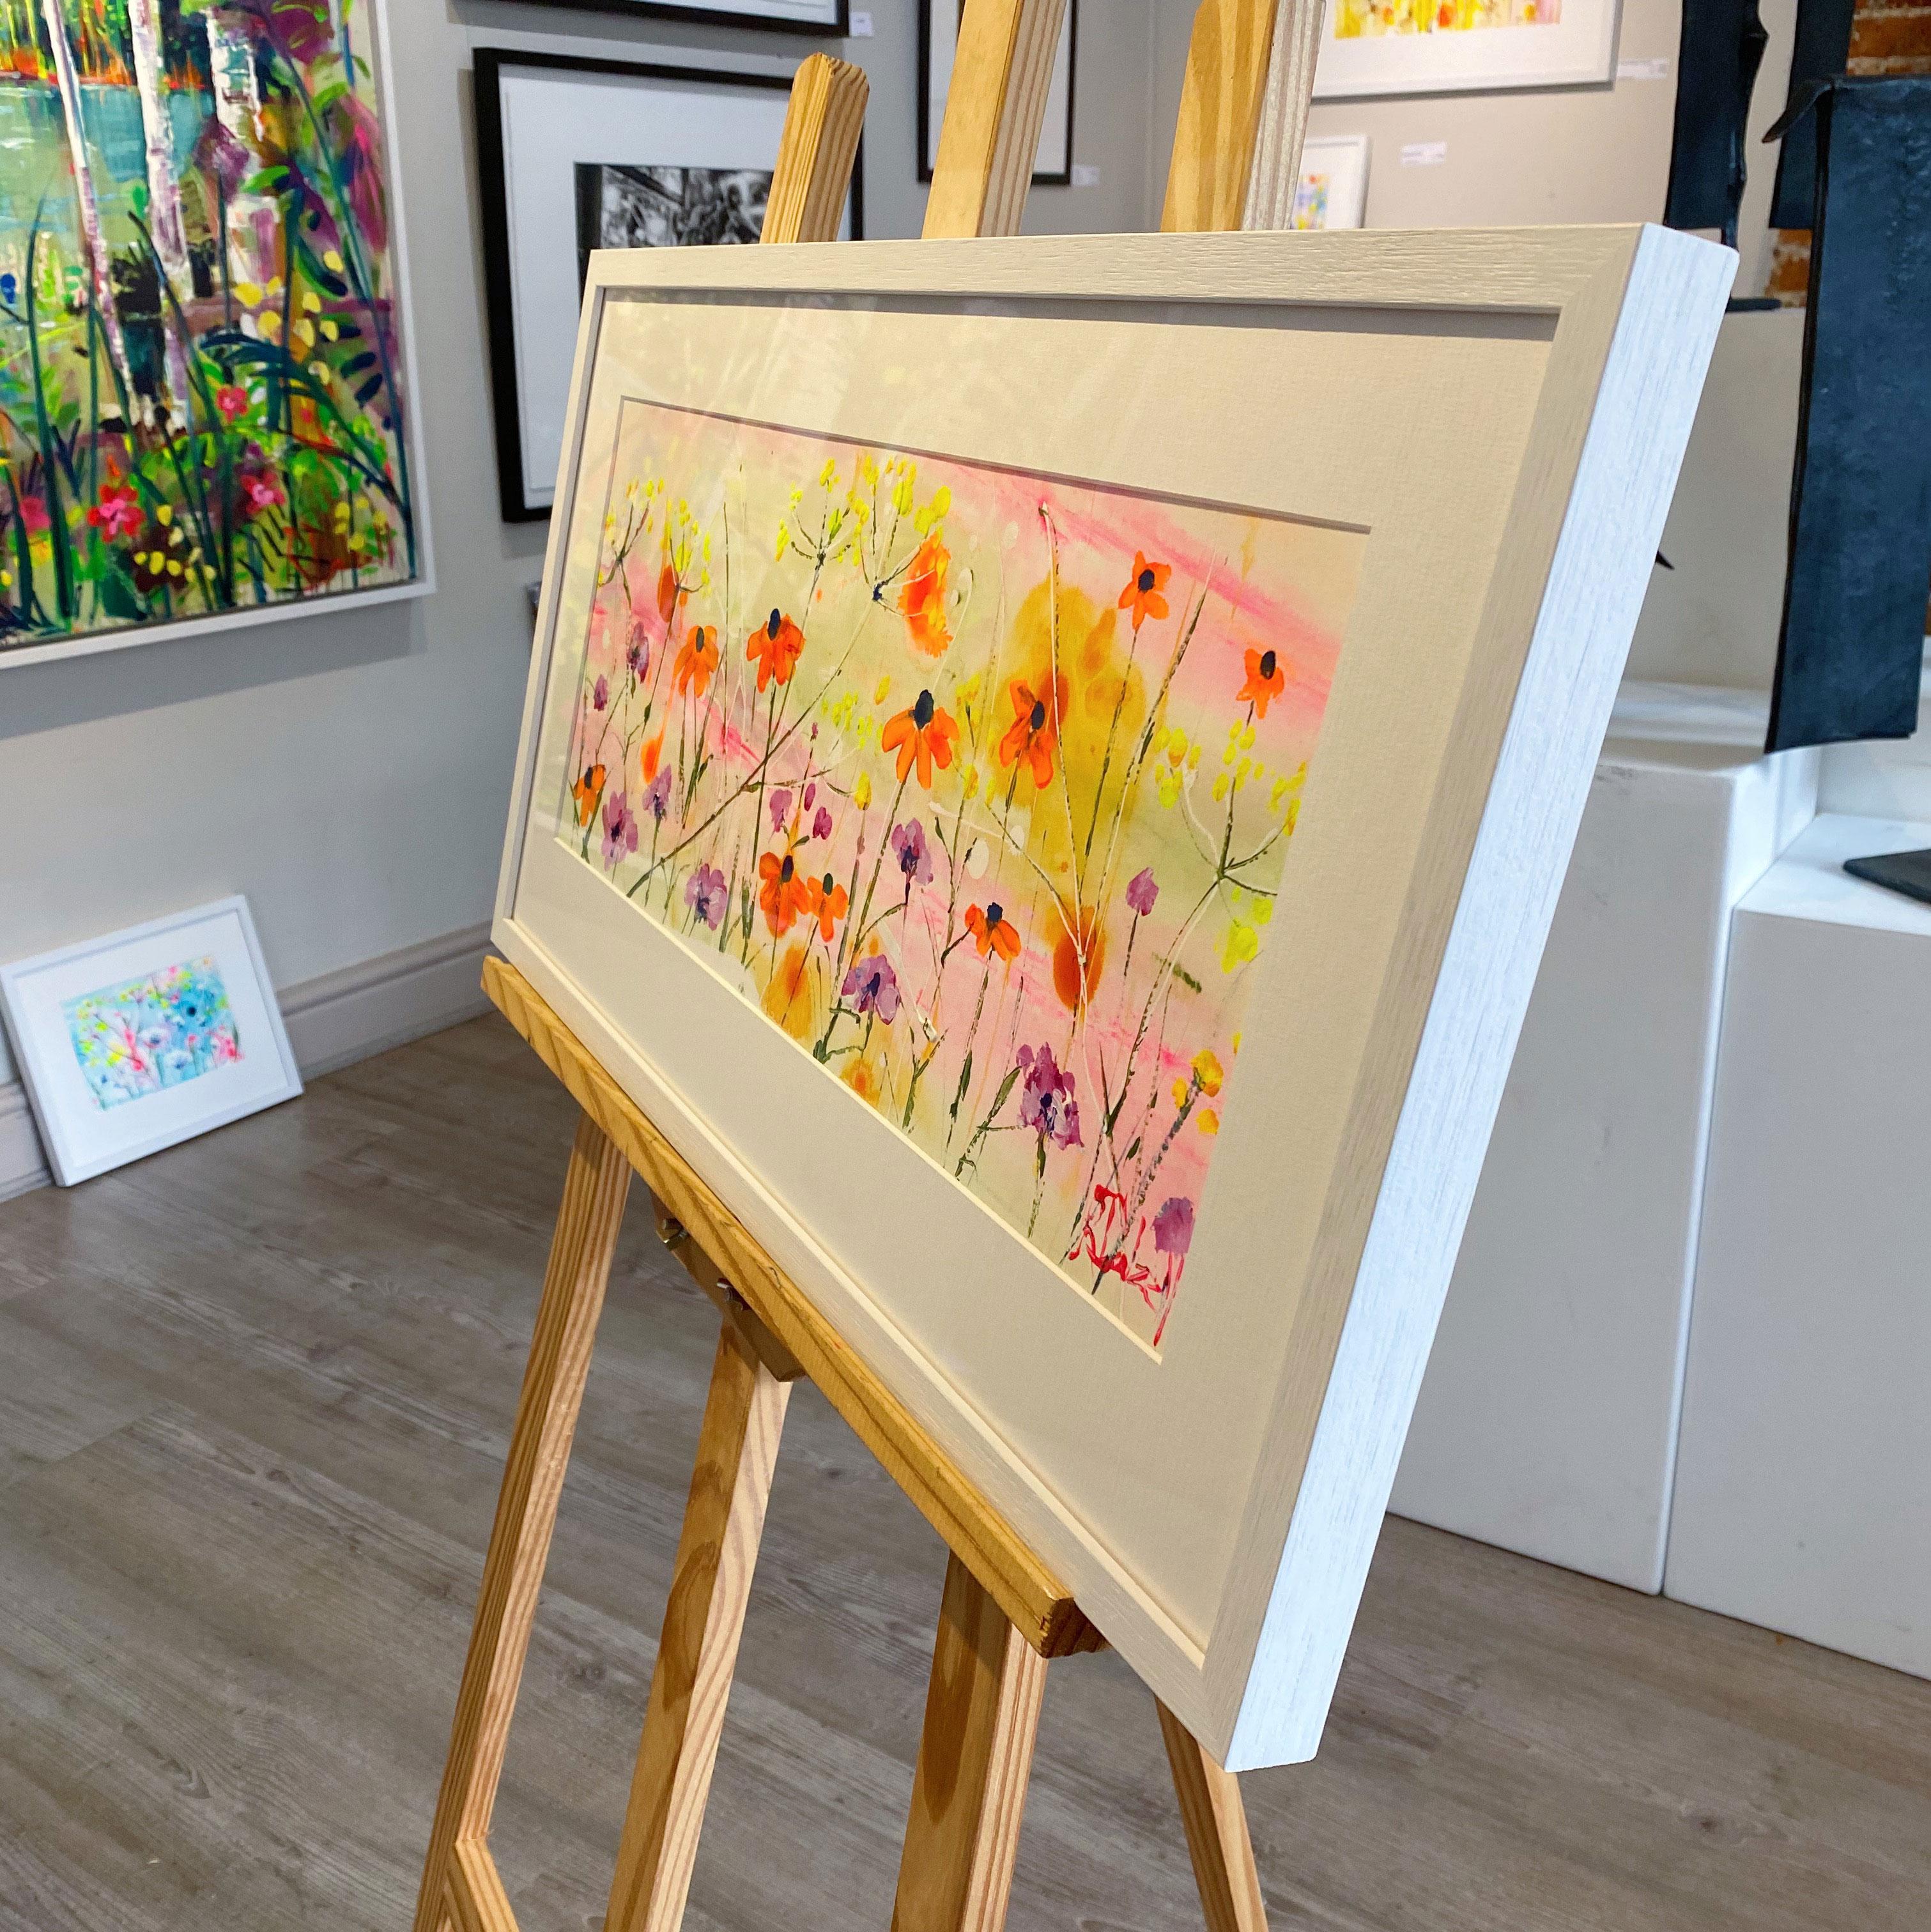 Gerberas against a pink sky…   A charming piece based on bright flowers.

Rachael’s works on paper are particularly organic.  Diluted paint is allowed to migrate on a damp surface, sticks are used to daub and scratch,  heavier splatters are dropped,